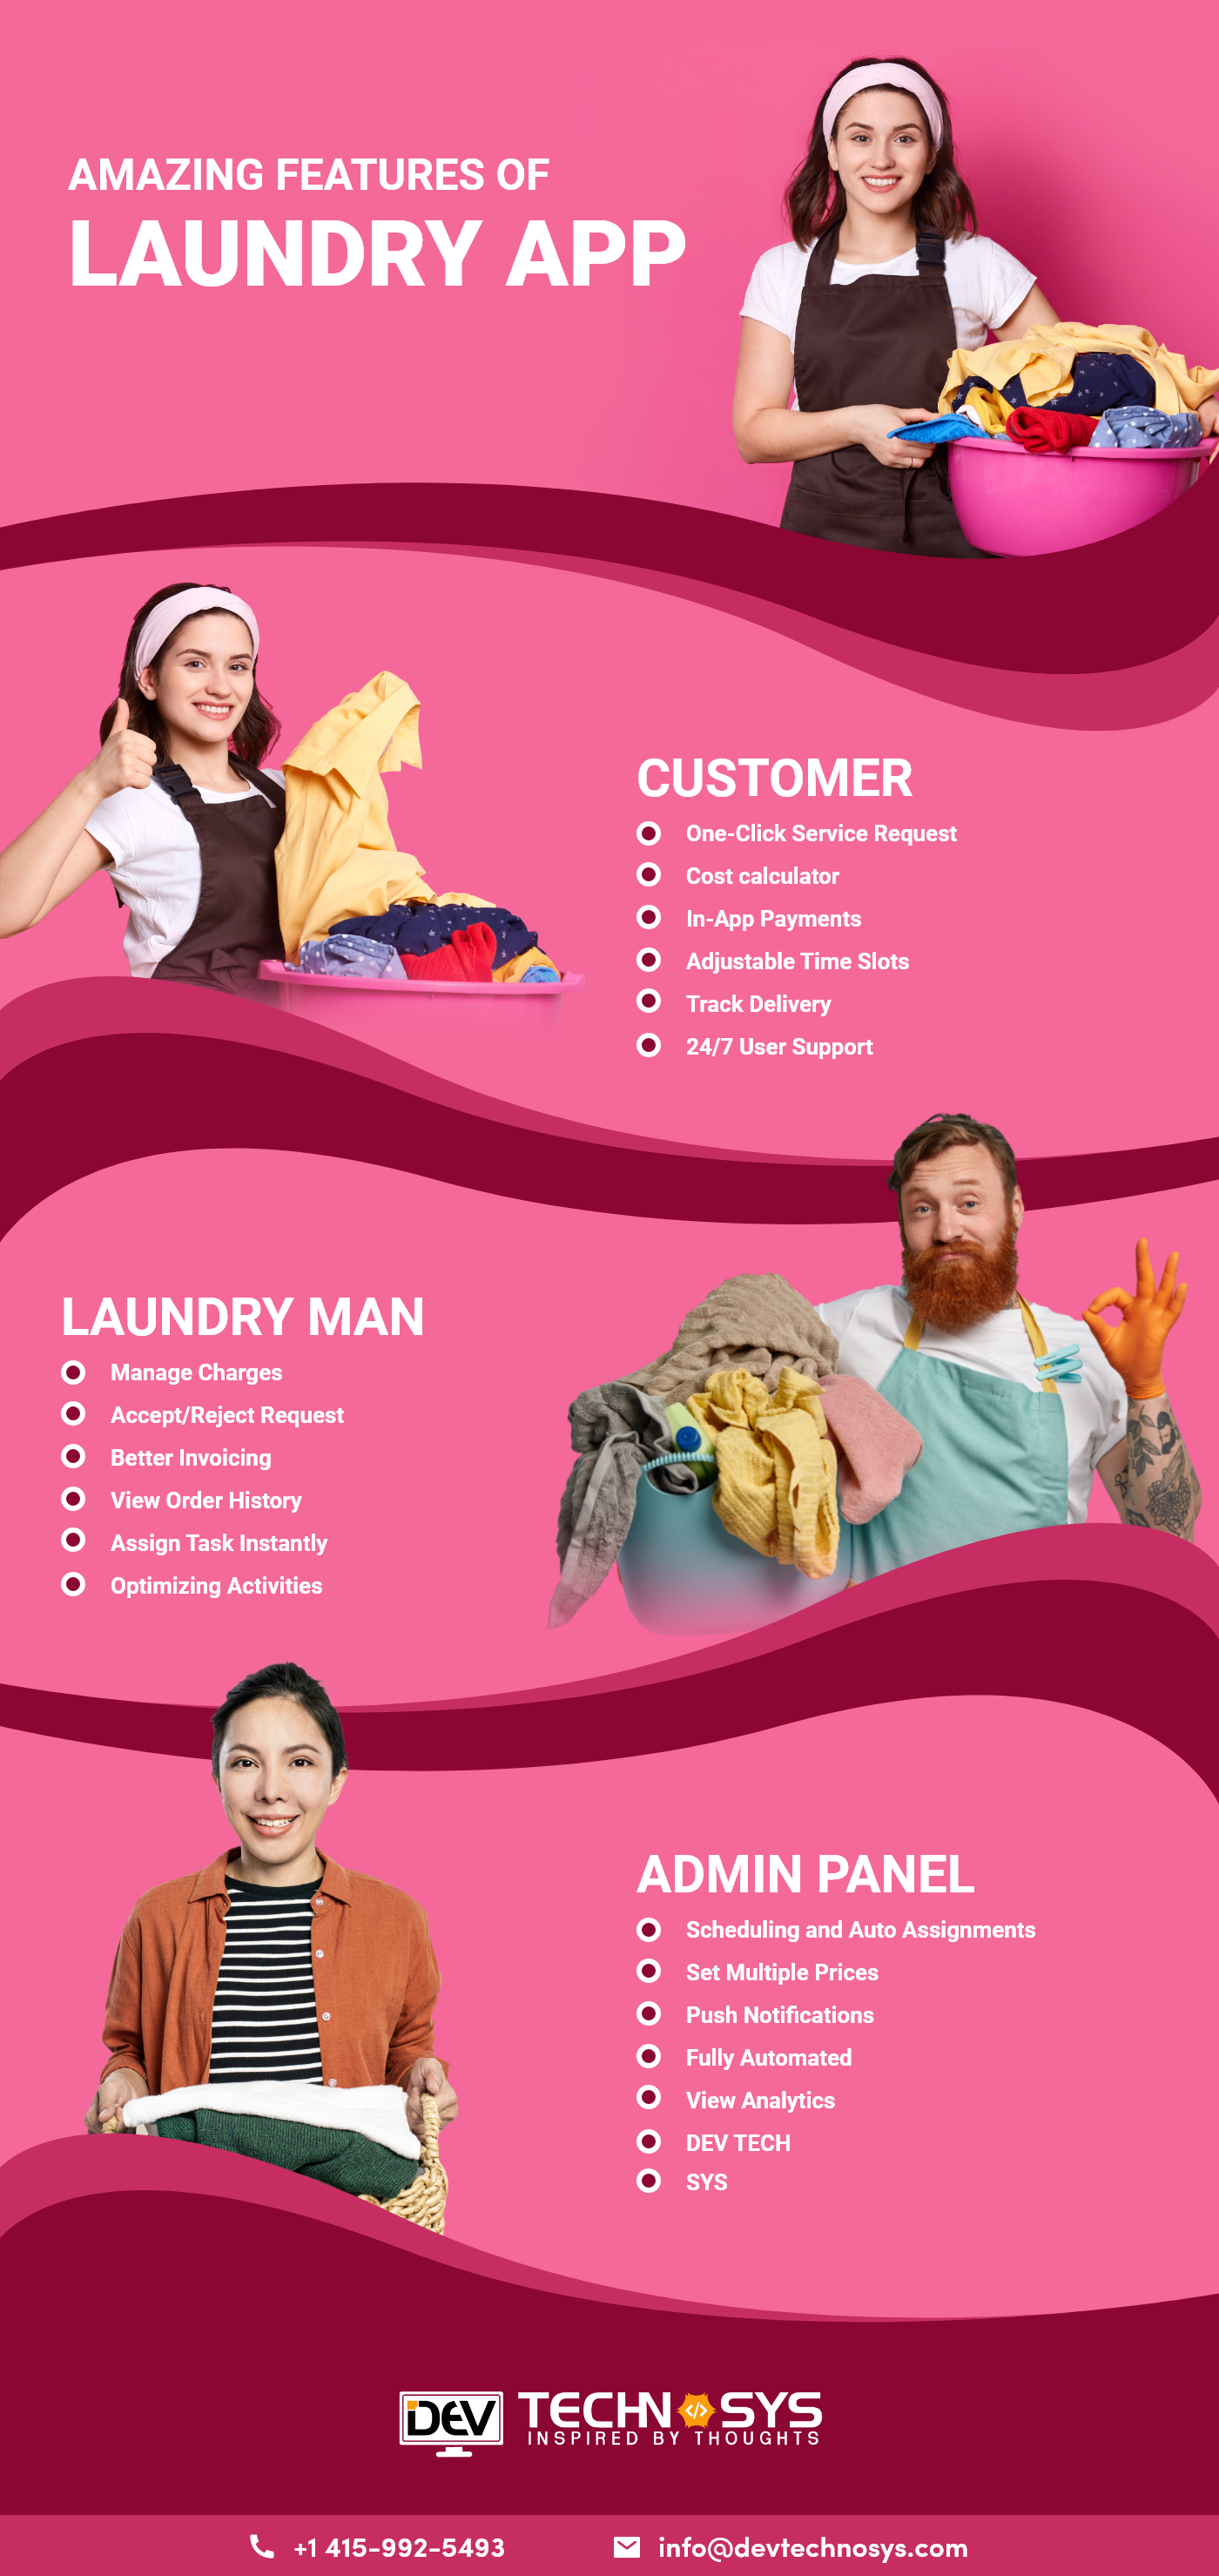 Features Required to Develop A Laundry Mobile App Like Laundryheap